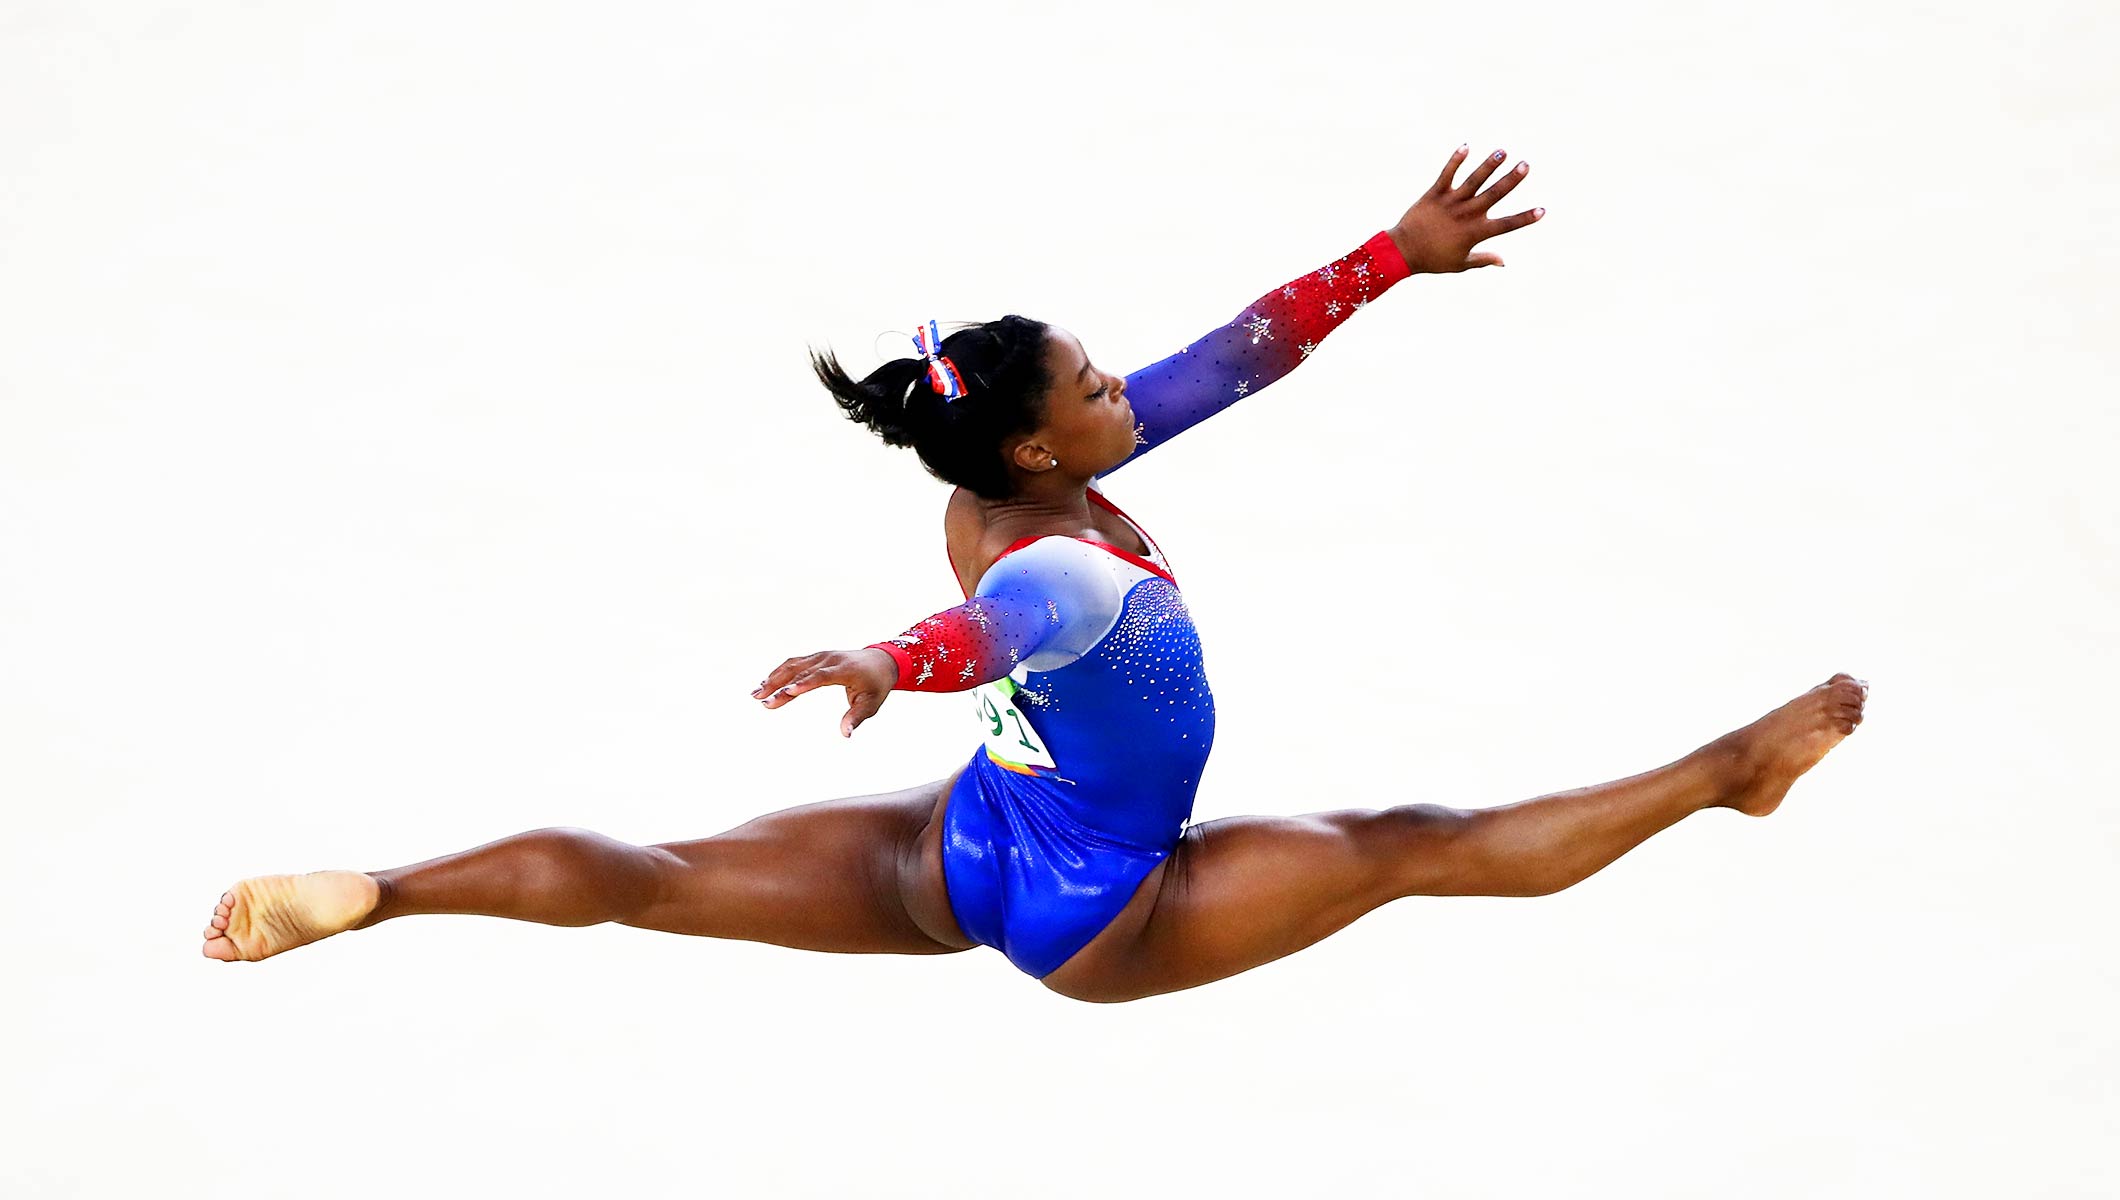 Simone Biles exclusive: "i'll be in Paris. one way or another&quo...